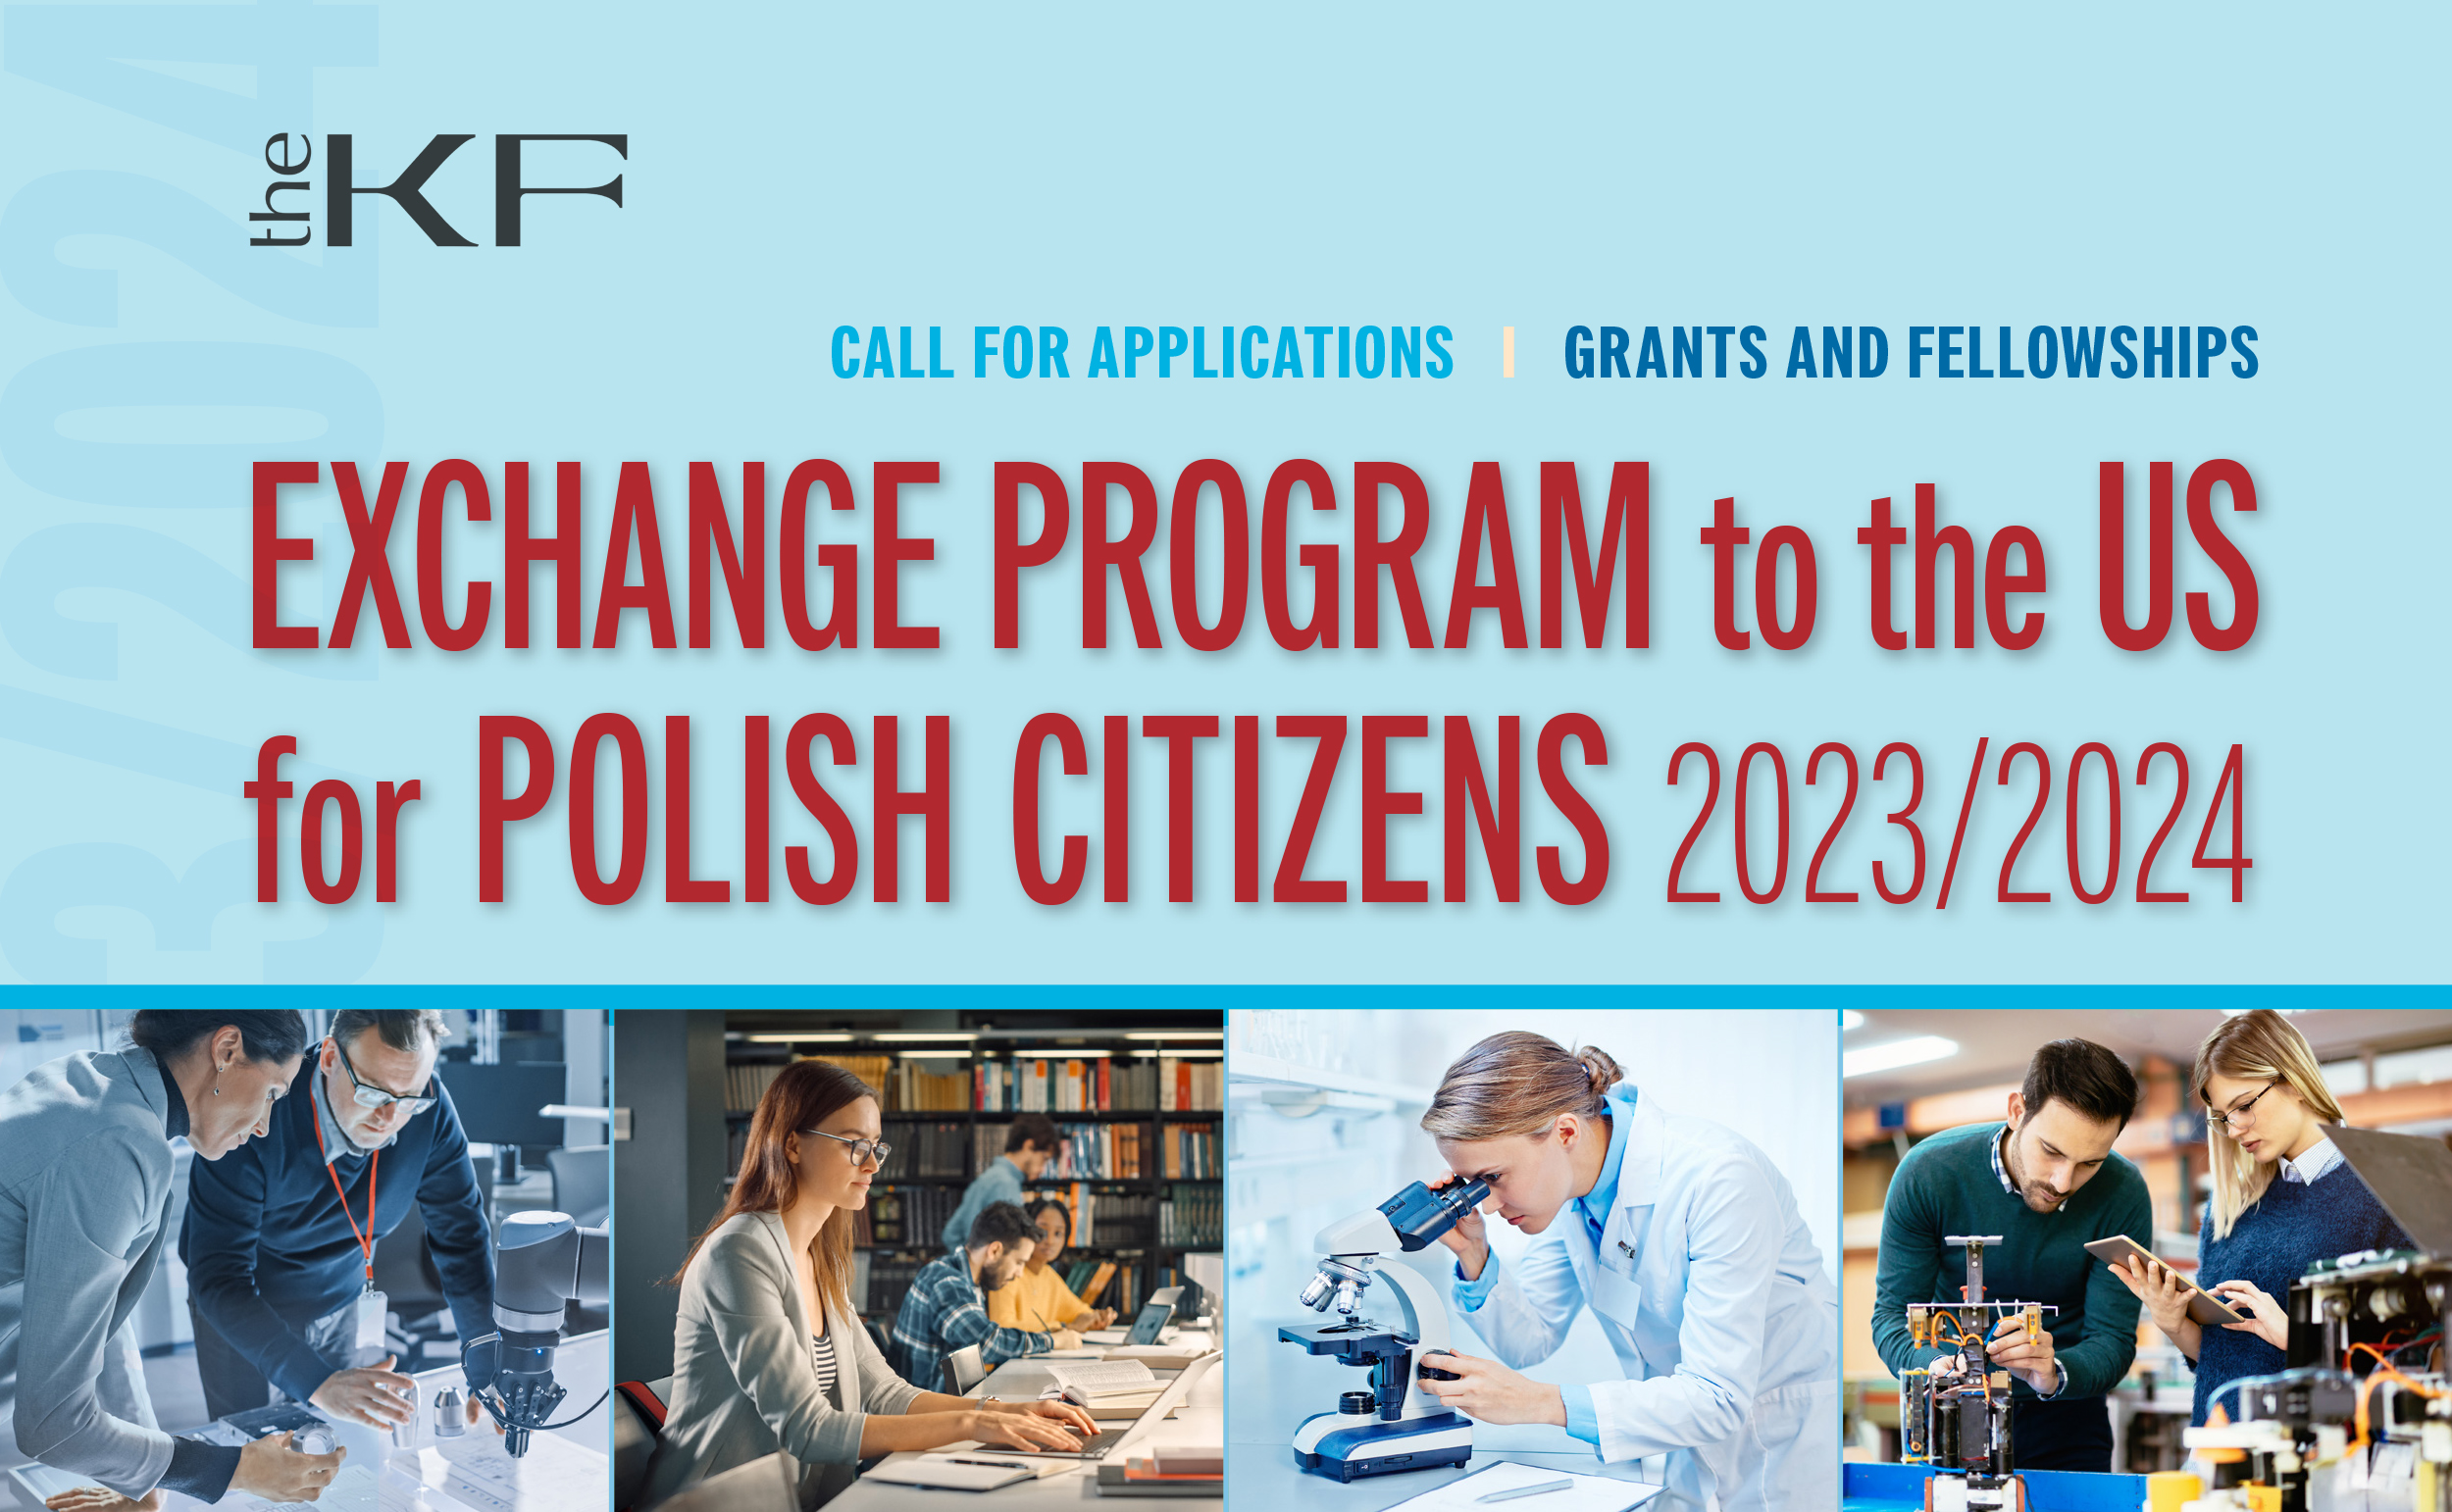 Grants and fellowships call for applications